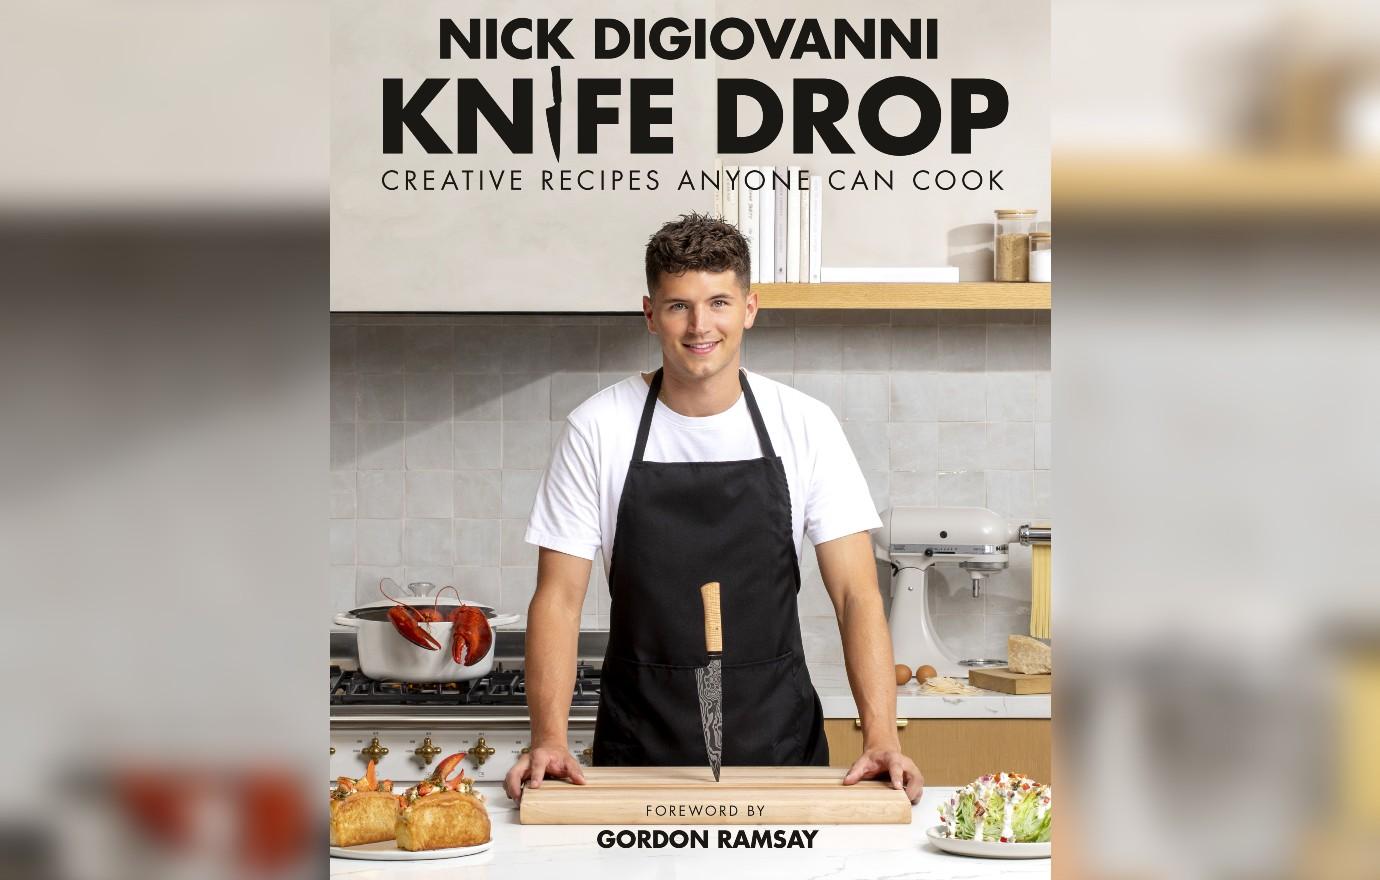 Chef Nick DiGiovanni whips up a recipe from his new cookbook